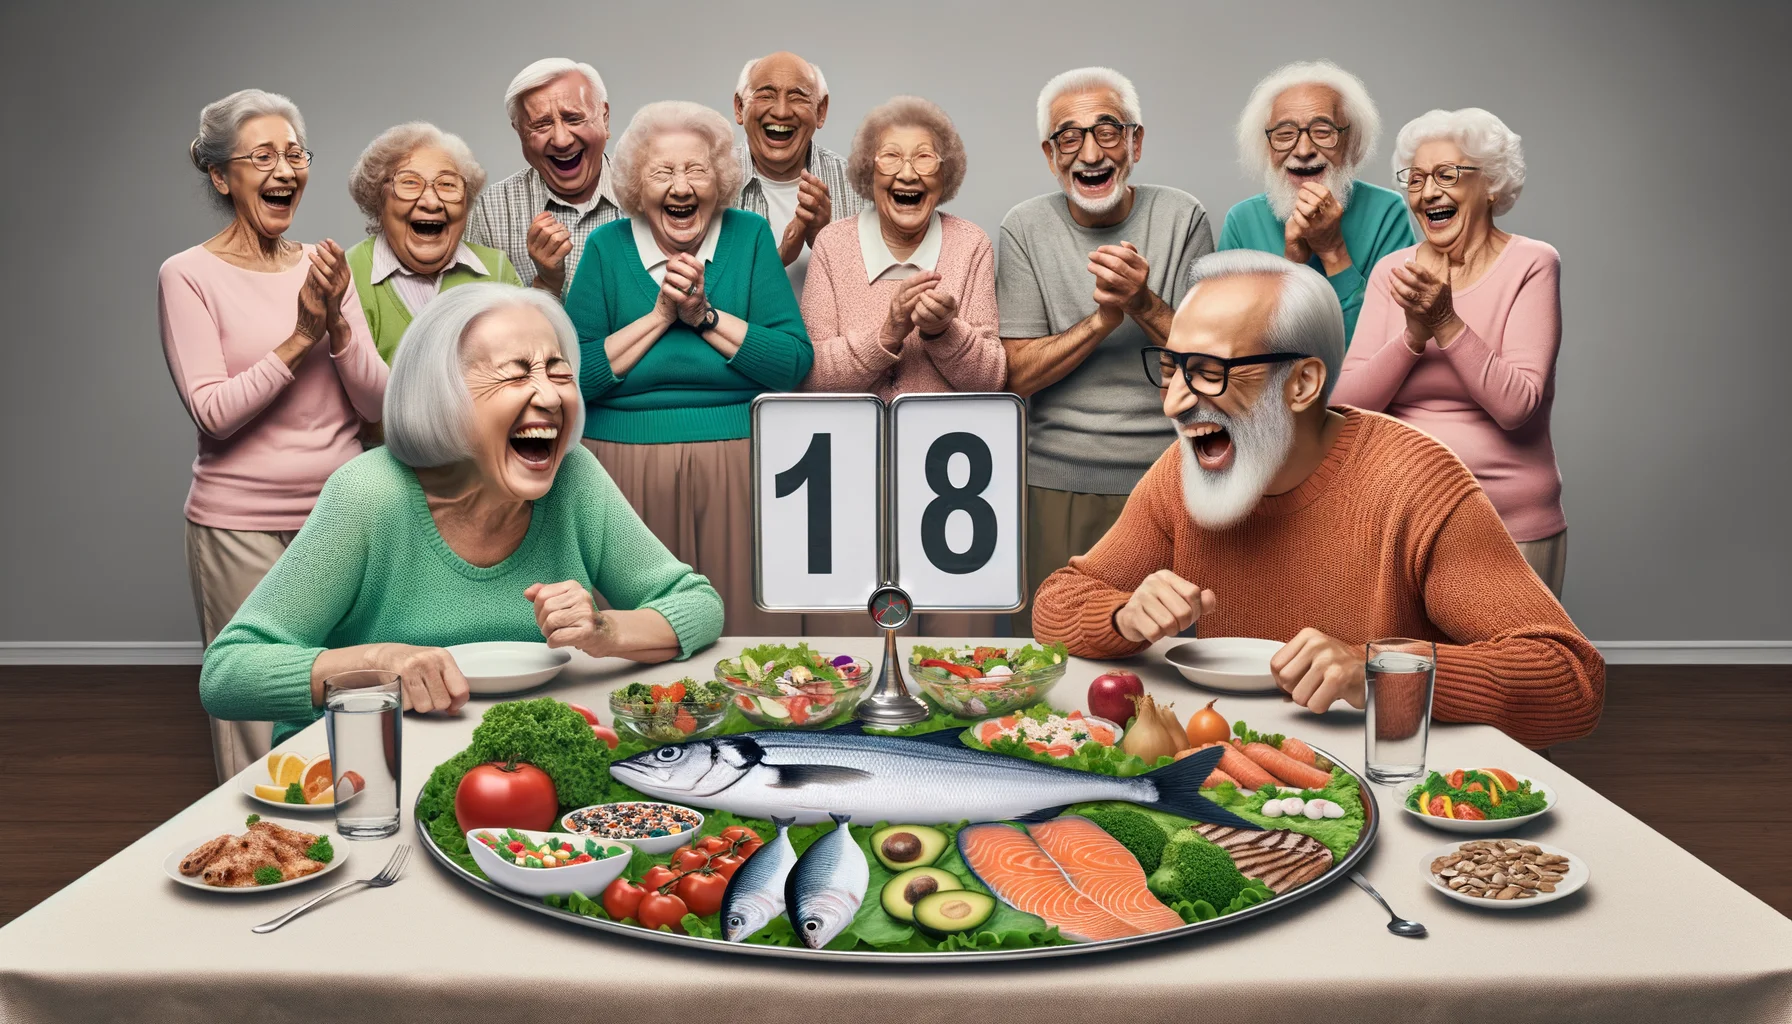 Create a humorously realistic image showcasing the '16:8 Leangains' form of intermittent fasting. The scene takes place in a lively senior citizen community. Two elderly people, a Hispanic woman and a Middle-Eastern man, both in workout attire, are sitting at a large dining table laughing heartily. On the table are various diet foods like salad, fish, and others arranged cleverly to show '16:8' in a visual manner. Around them, other senior citizens of different descents and genders look on in amazement and amusement, adding a lighthearted tone to the concept of dieting and exercise.